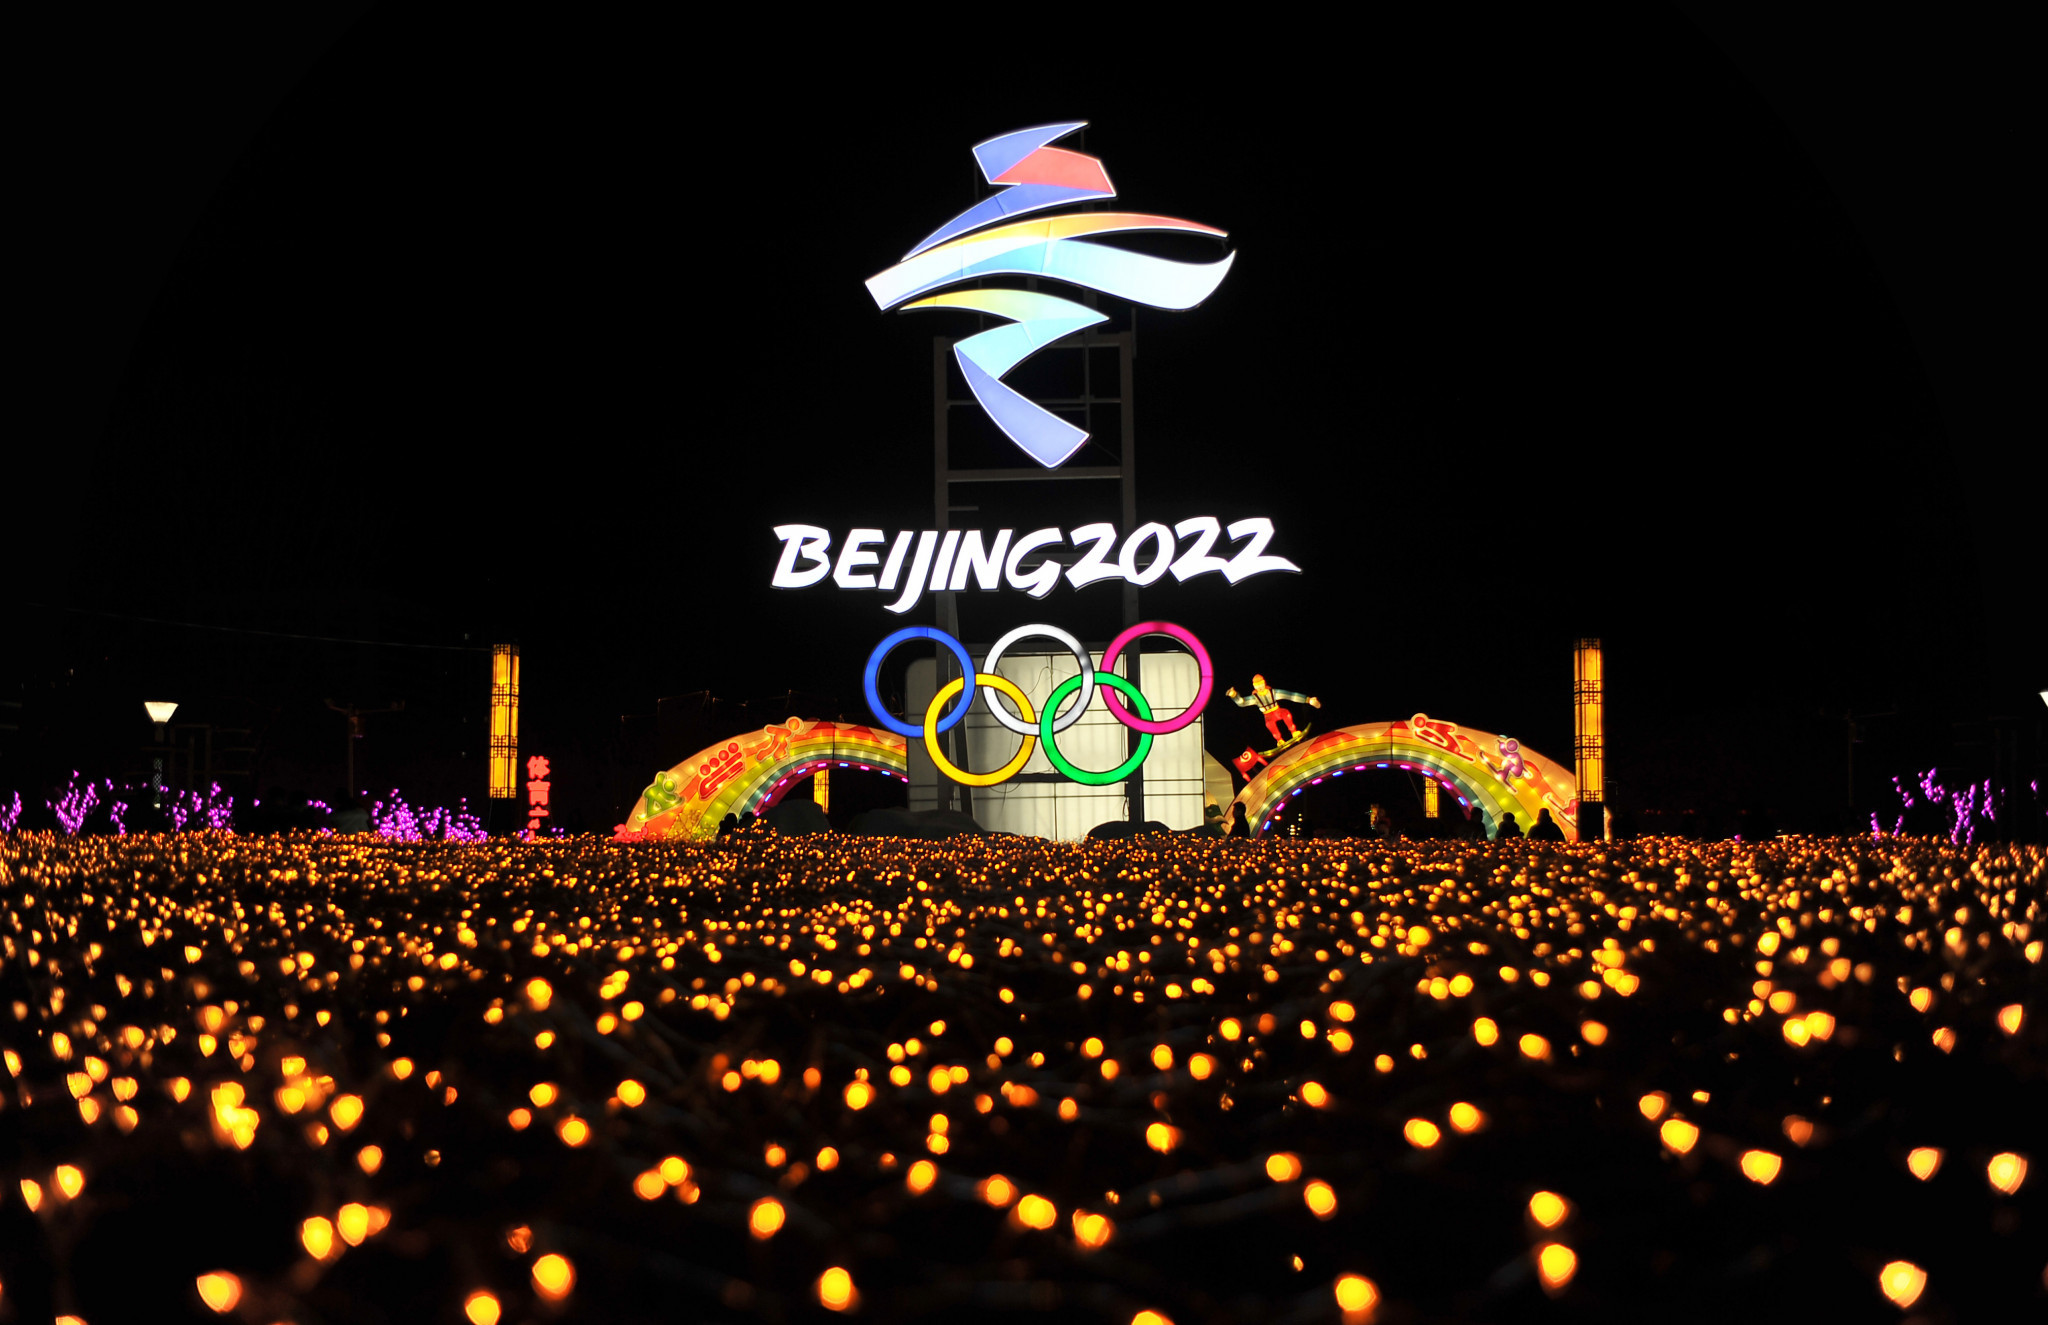 Beijing 2022 are looking to promote winter sports in preparation for the Games ©Getty Images